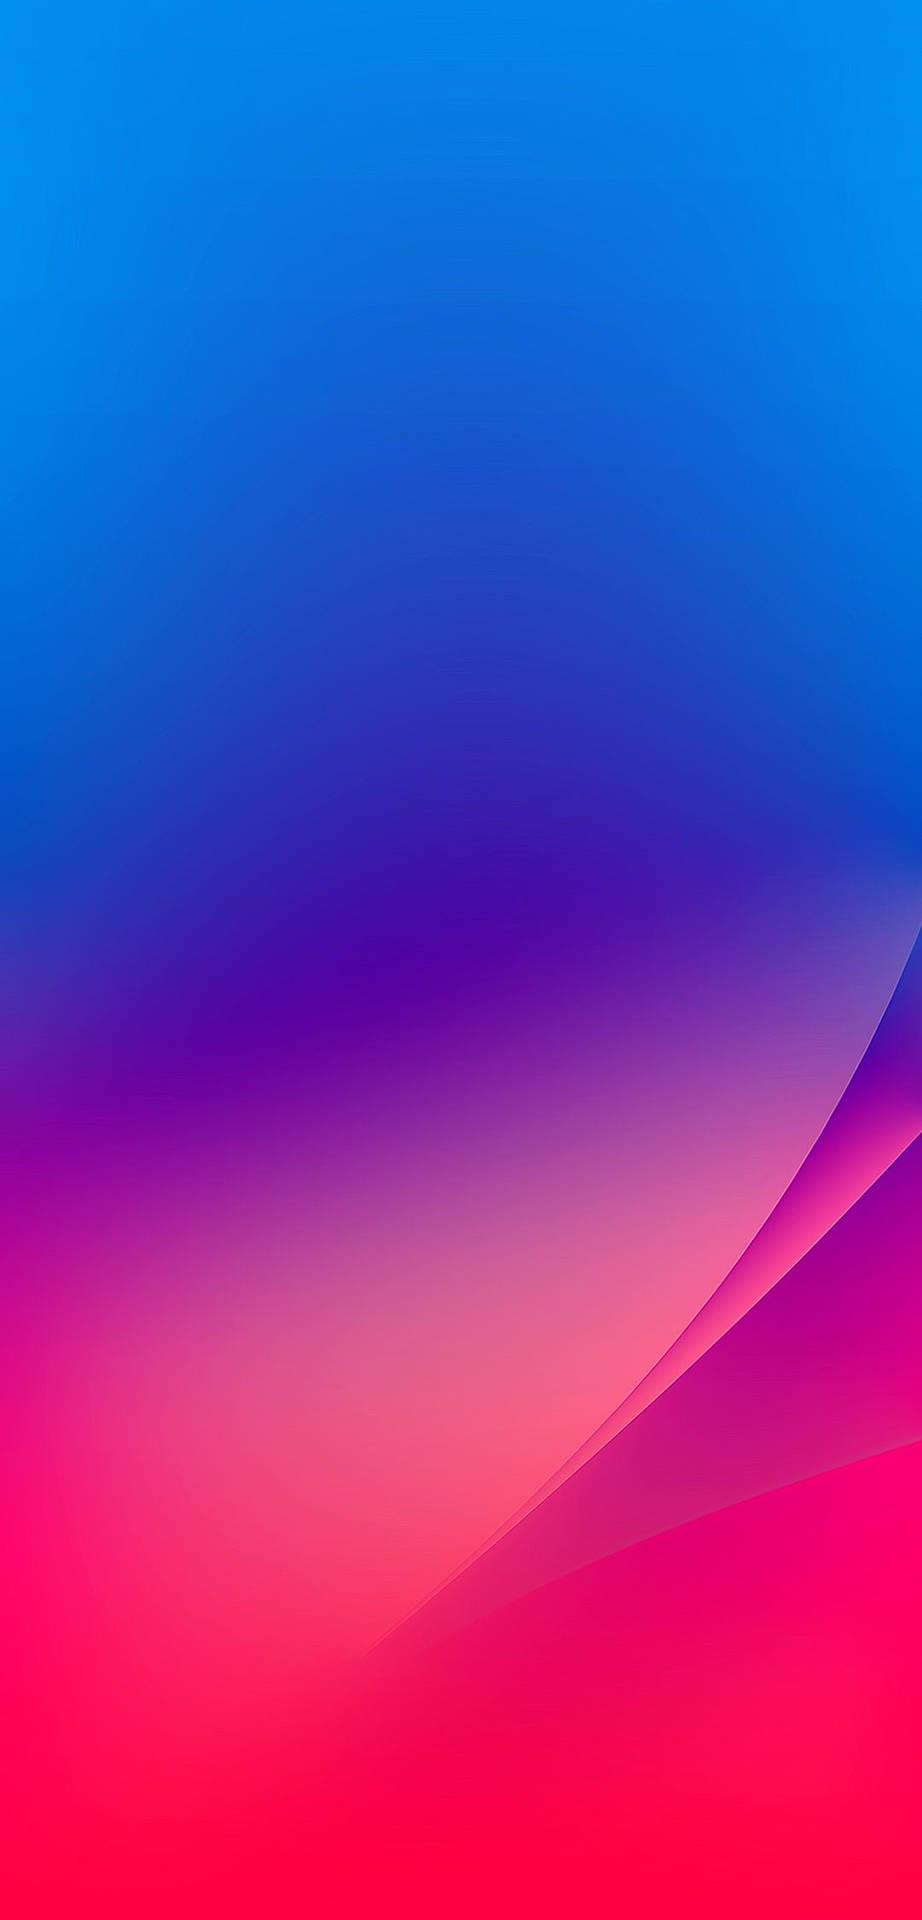 A Blushing Combination - iPhone XR In Blue and Pink Wallpaper